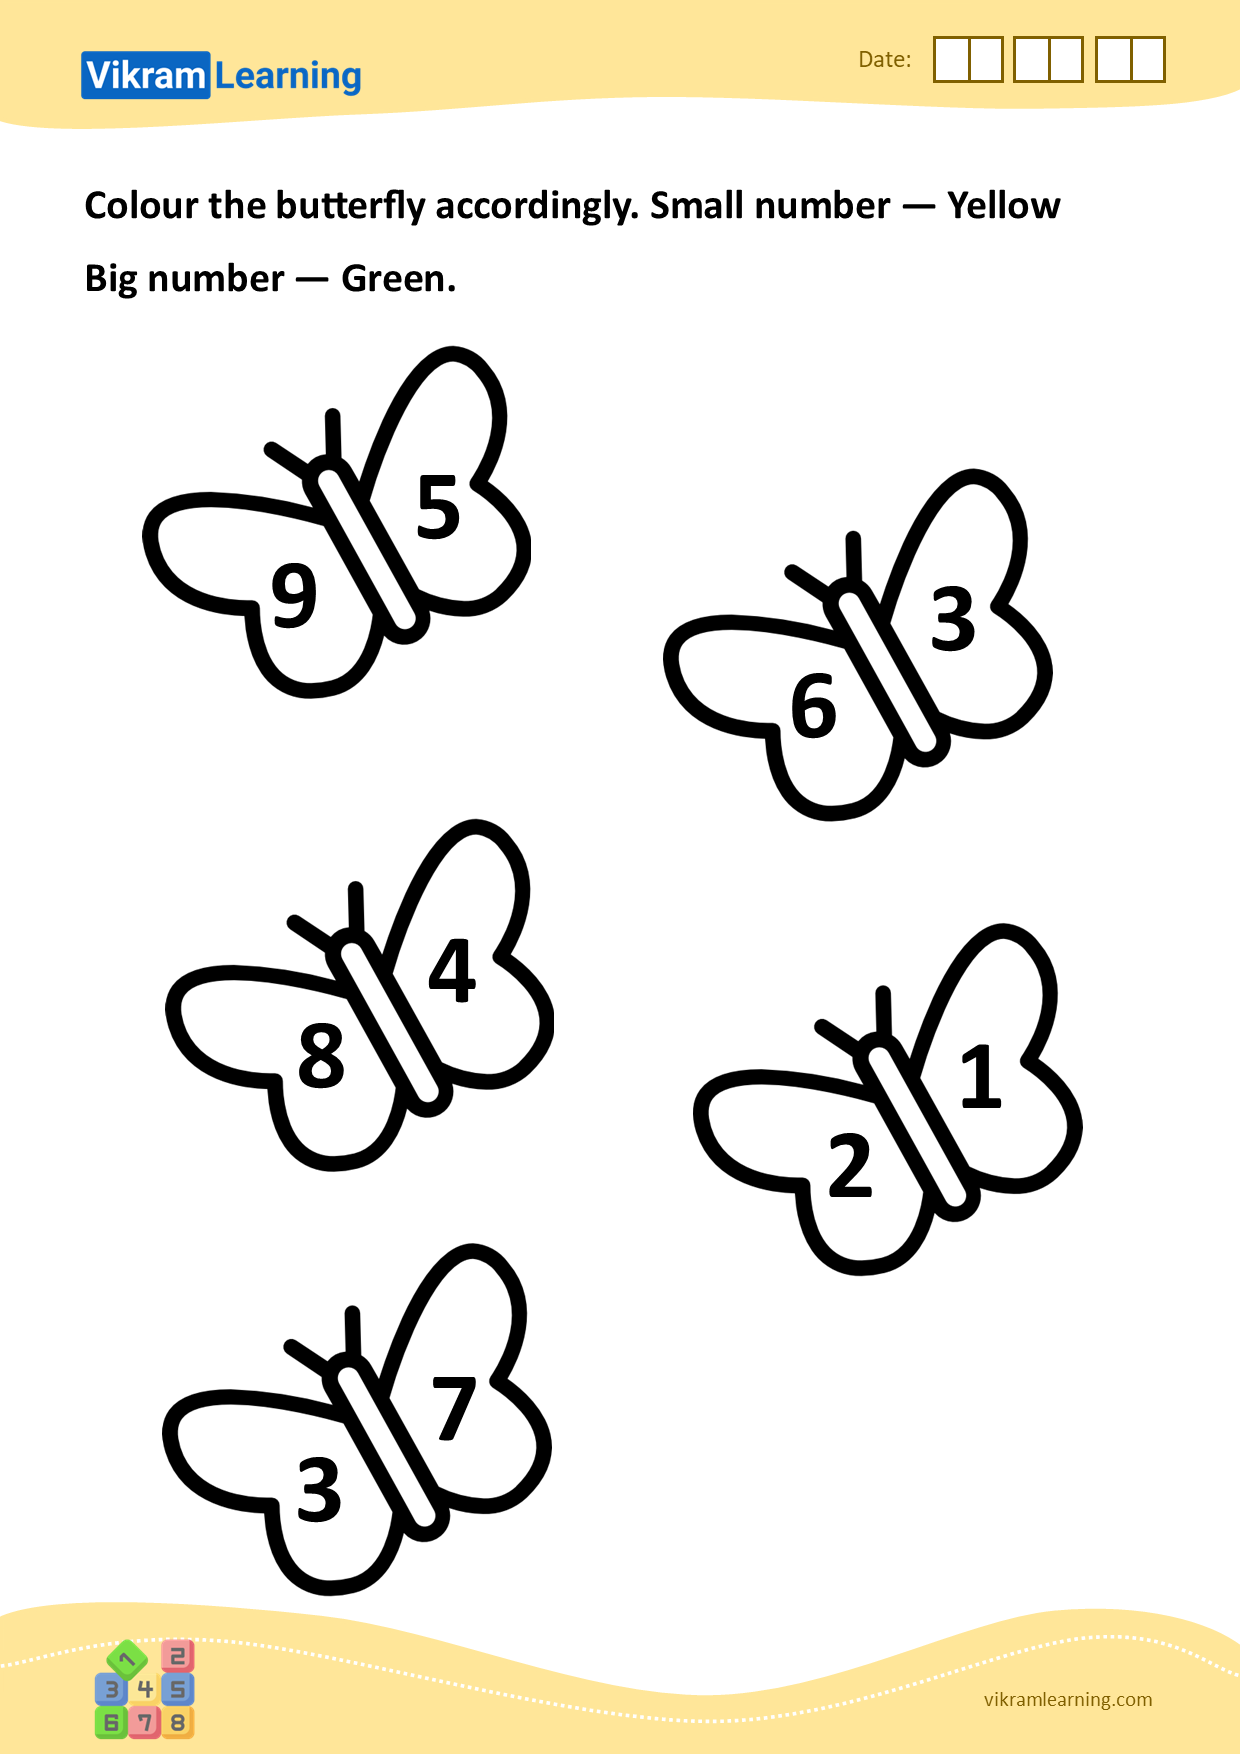 Download colour the butterfly accordingly. small number — yellow 
big number — green worksheets